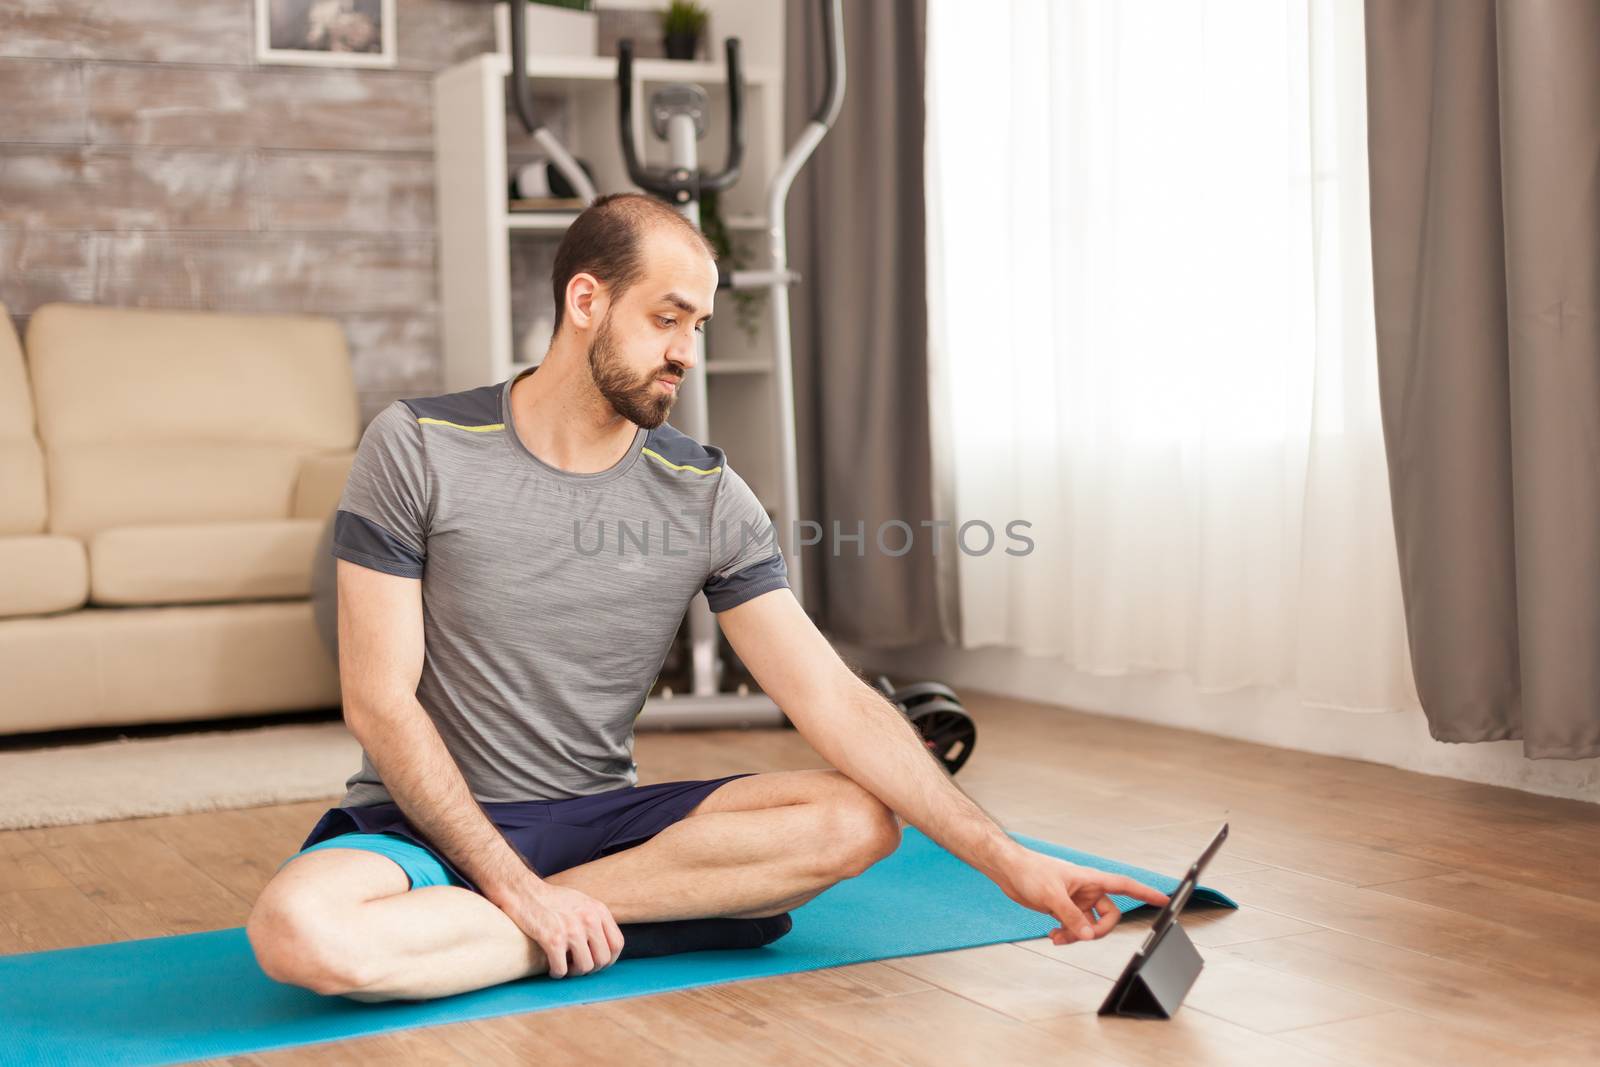 Happy man with healthy lifestyle watching yoga class on tablet computer during covid-19 self isolation.